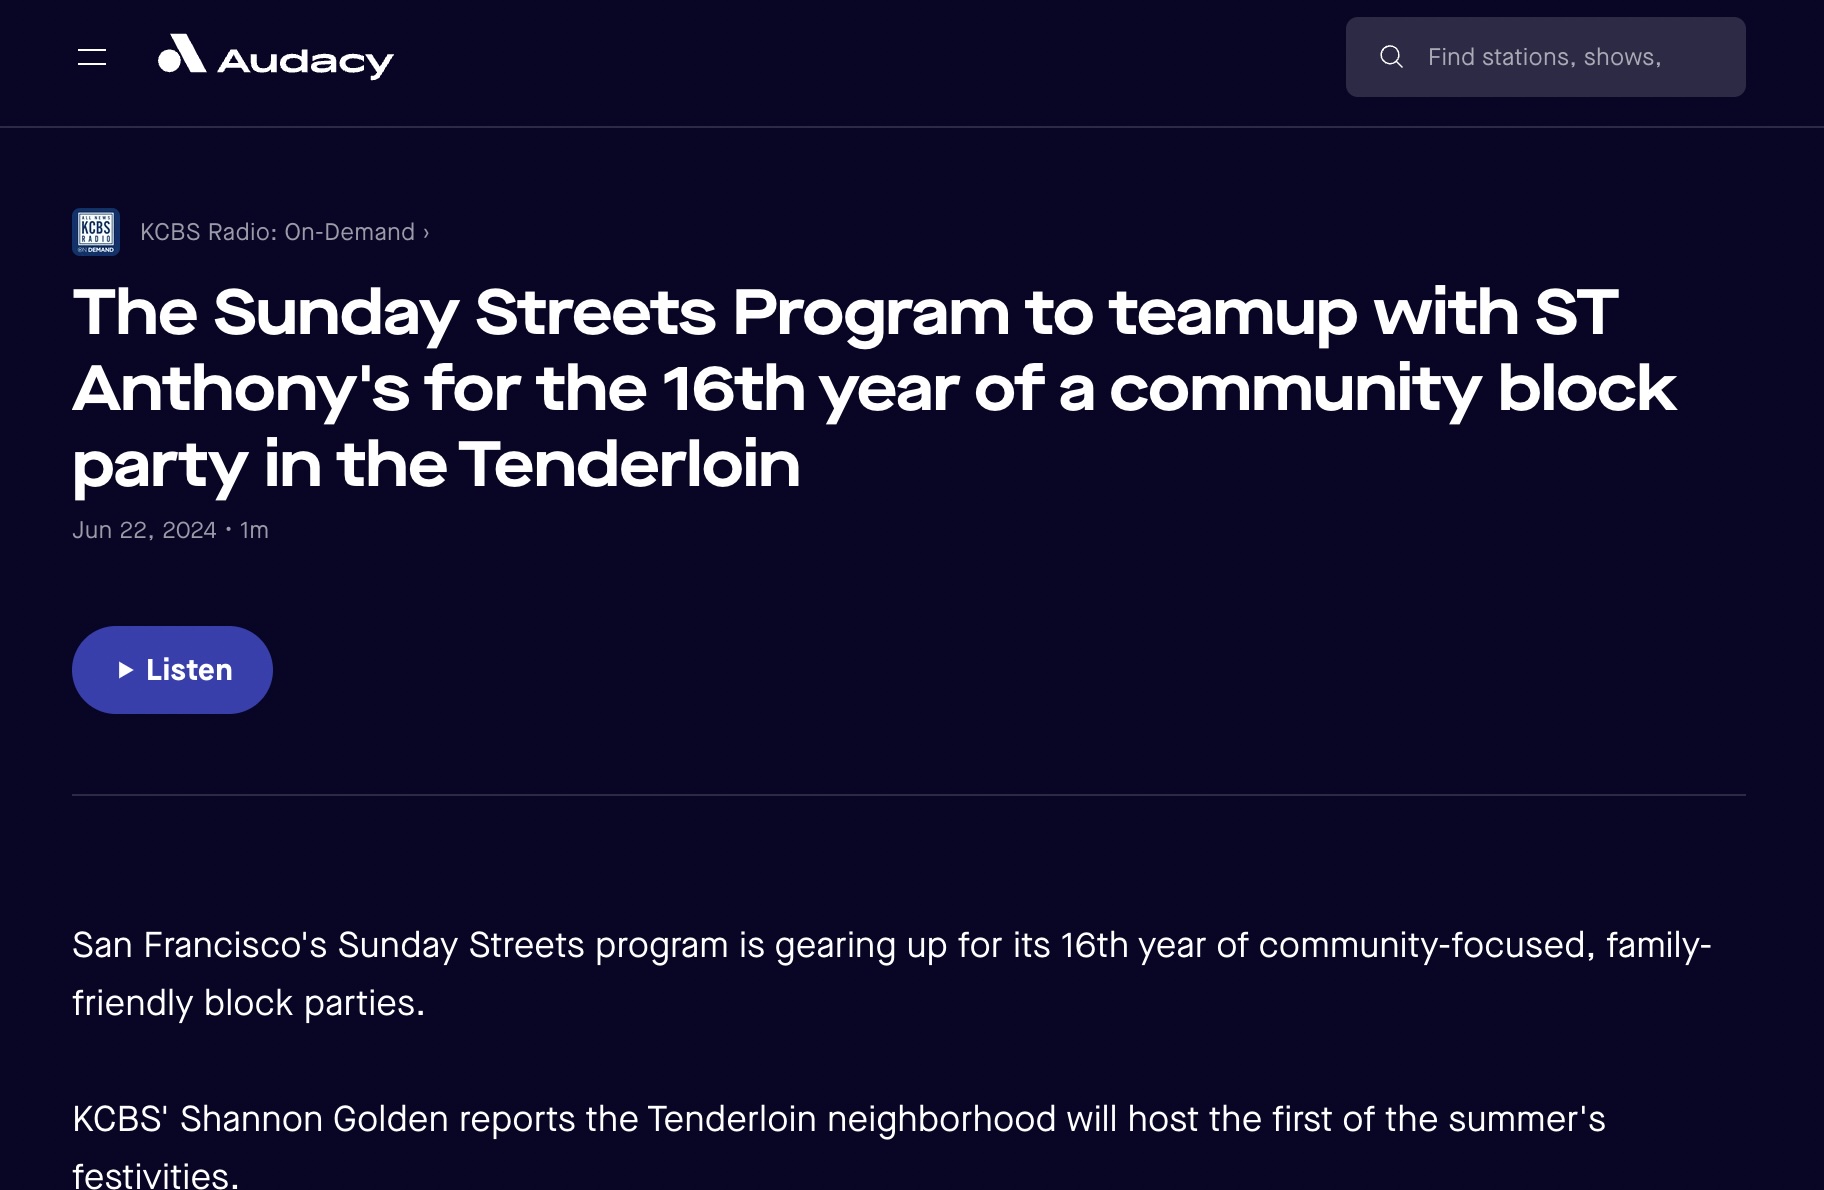 Audacy: The Sunday Streets Program to teamup with ST Anthony’s for the 16th year of a community block party in the Tenderloin